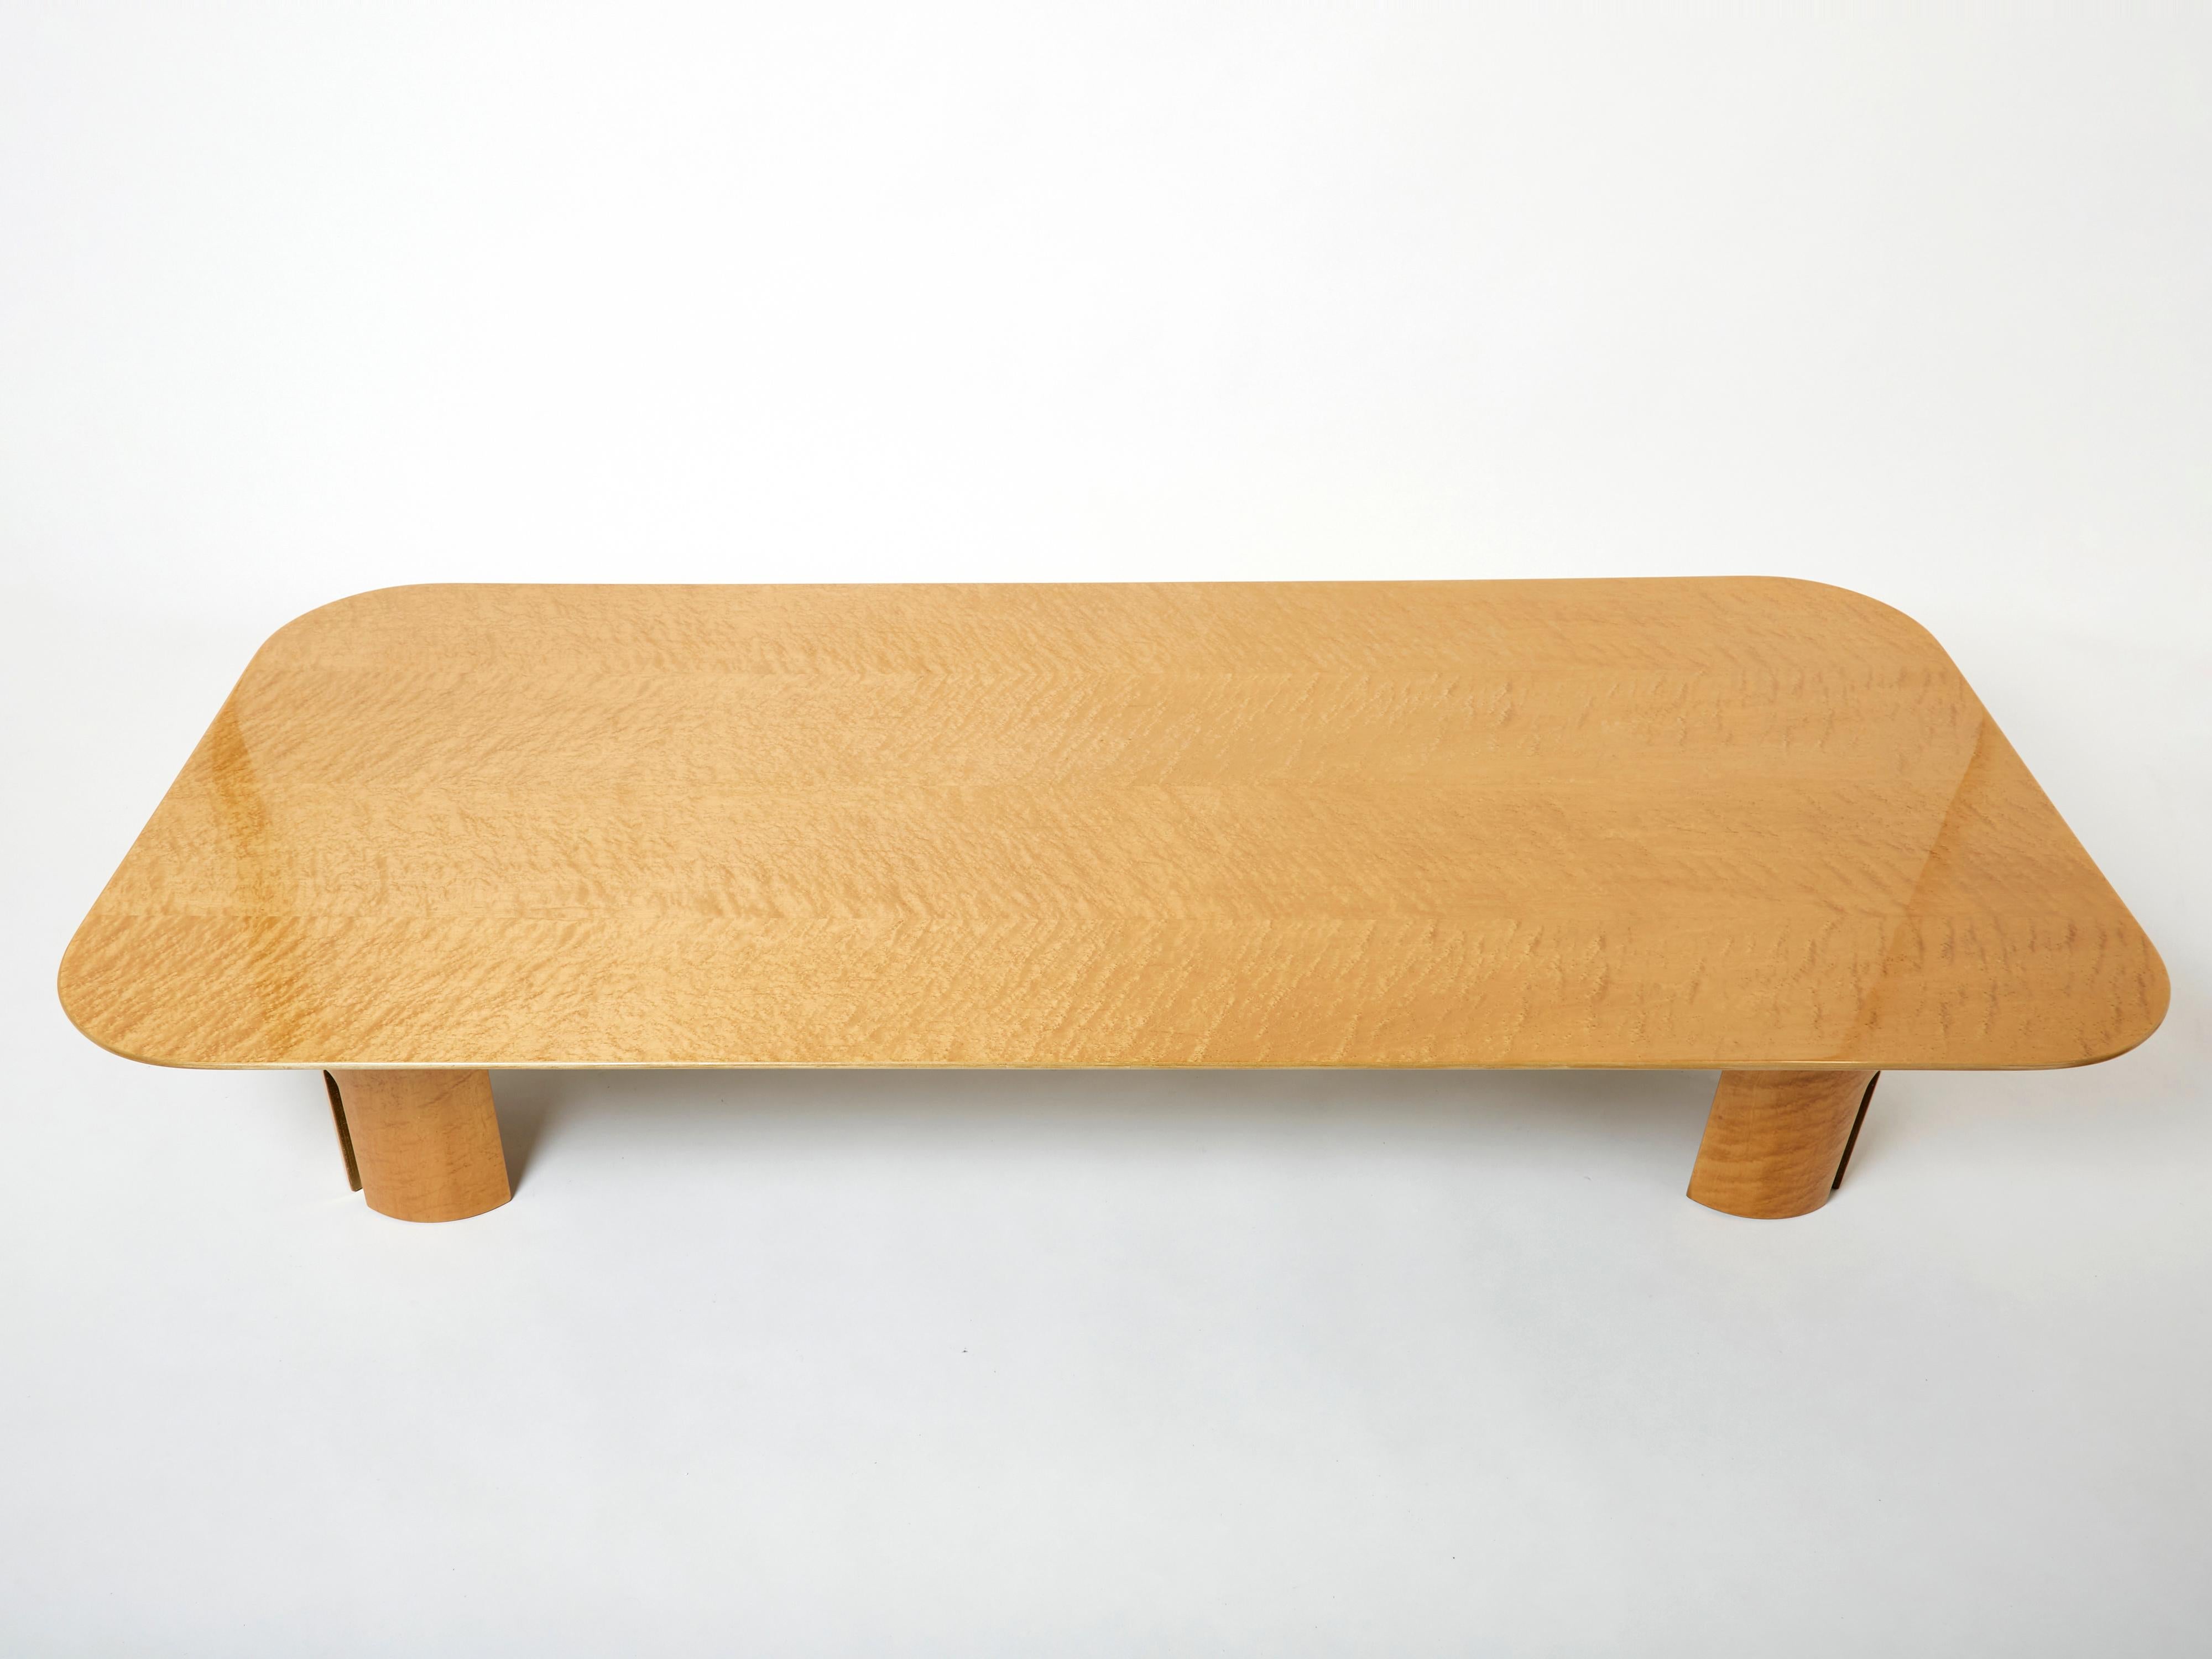 Designed by Giovanni Offredi for Saporiti Italia in the early 1980s, this beautiful coffee table is fully veneered with birdseye maple wood, with brass inlays on the feet. Its symmetry, curvy lines and strong architectural design all combine to